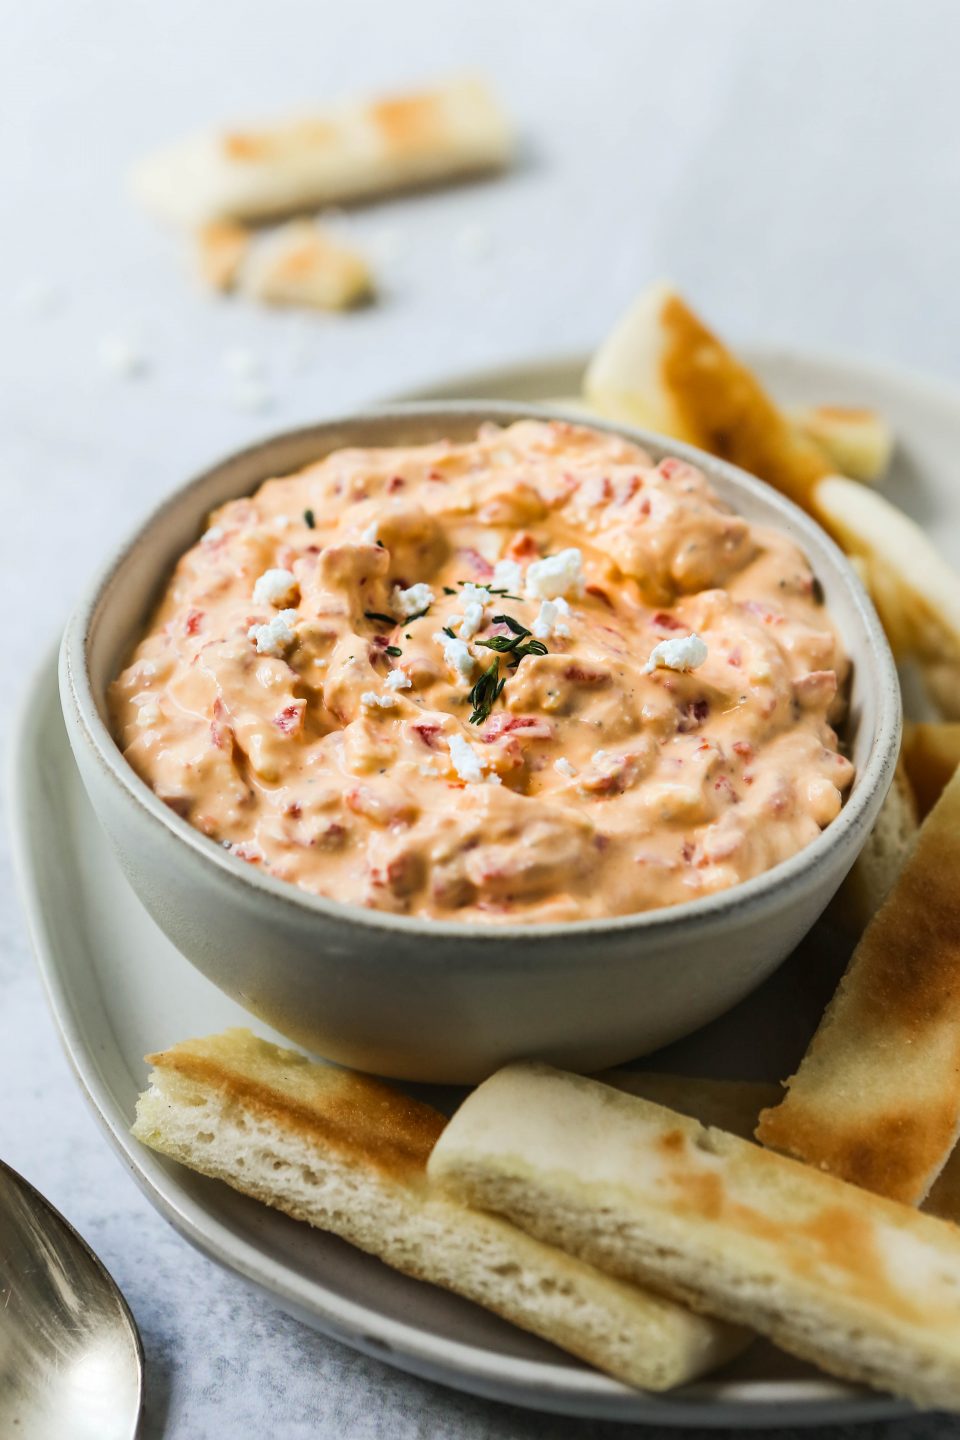 A 45 degree angle of roasted red pepper and feta dip in a gray bowl, on a gray plate with a cement background. Slices of toasted pita bread are scattered around.